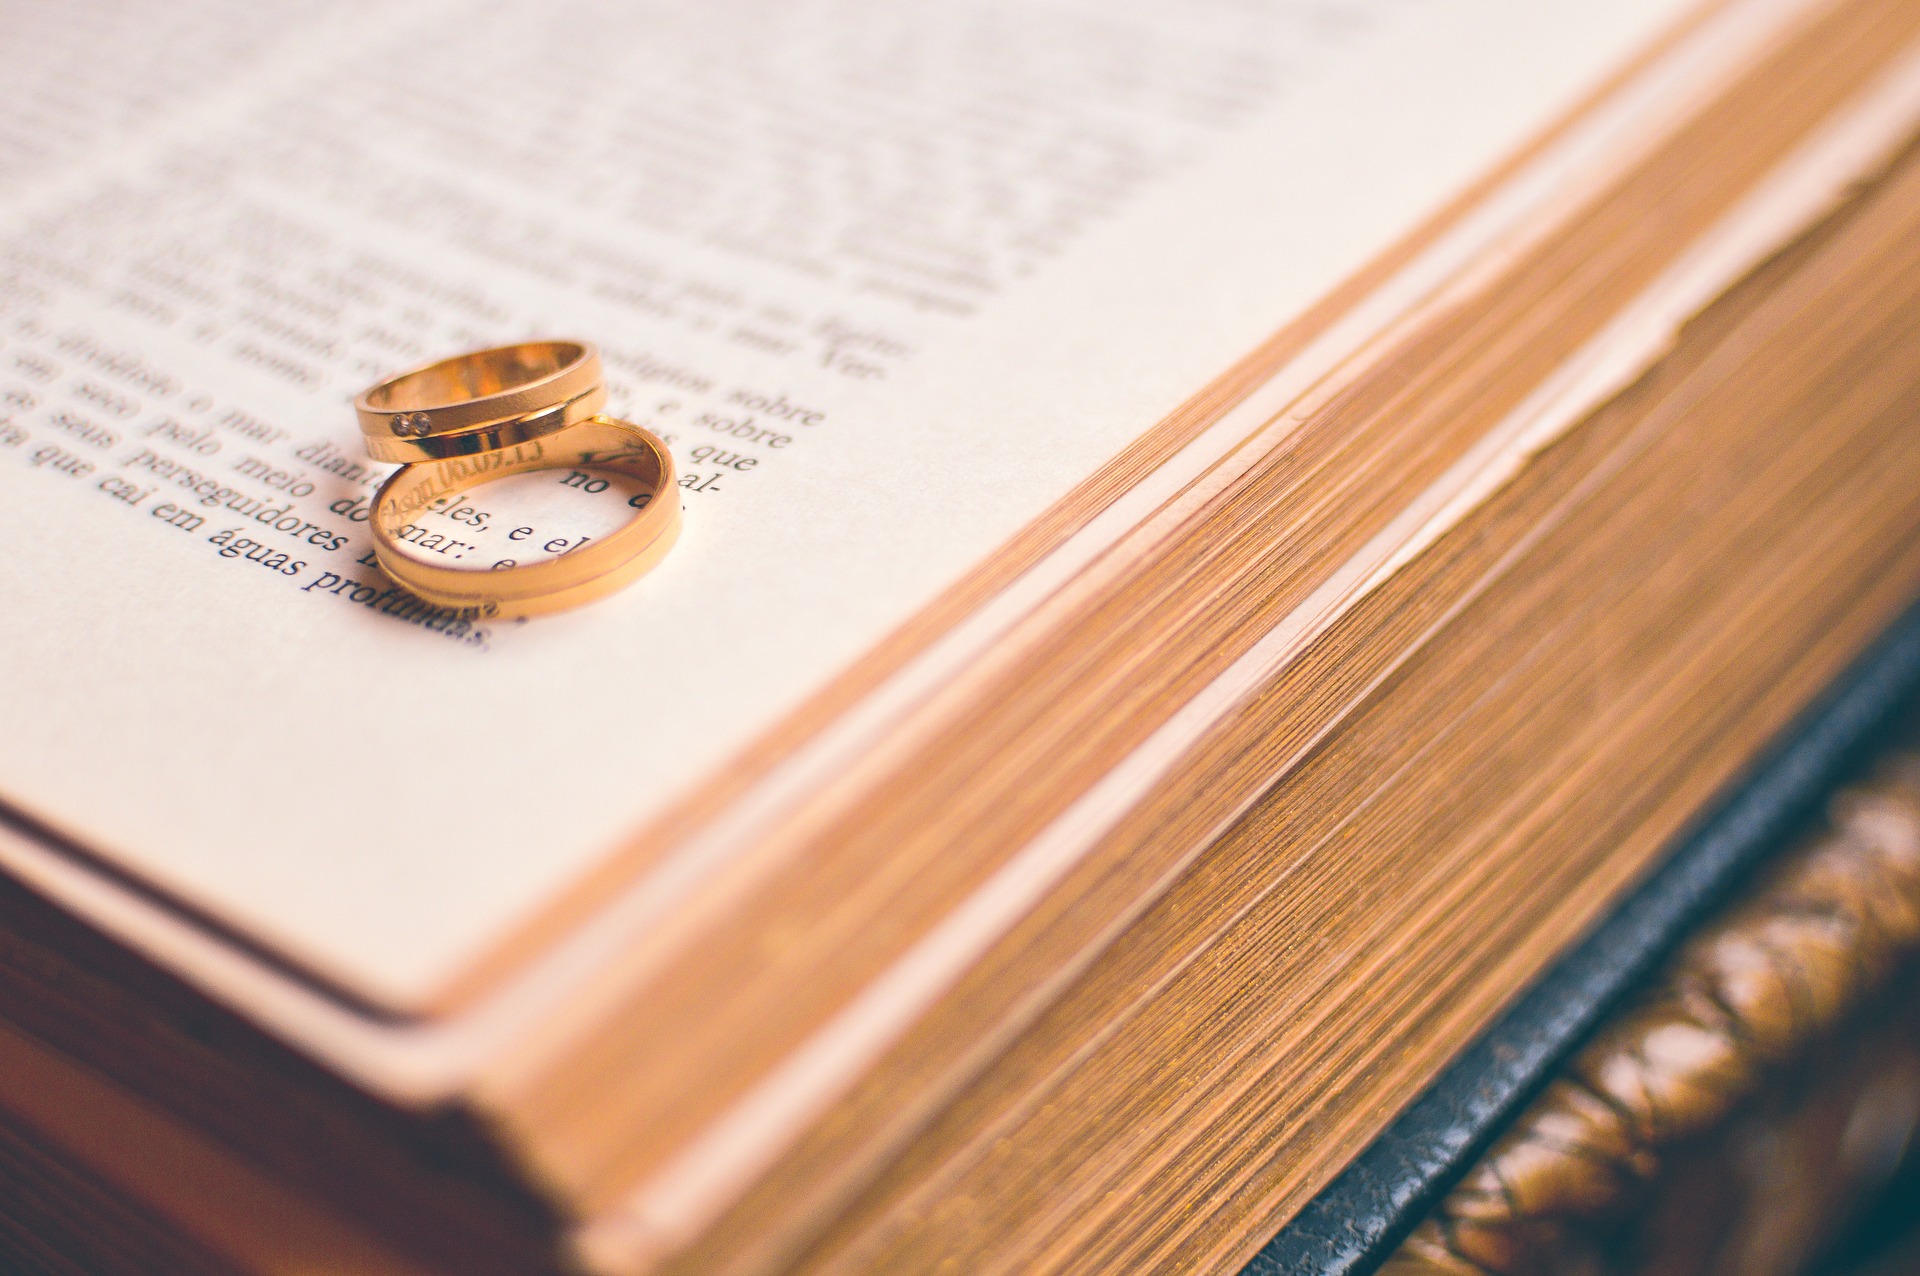 Two wedding rings lay on top of an open book.